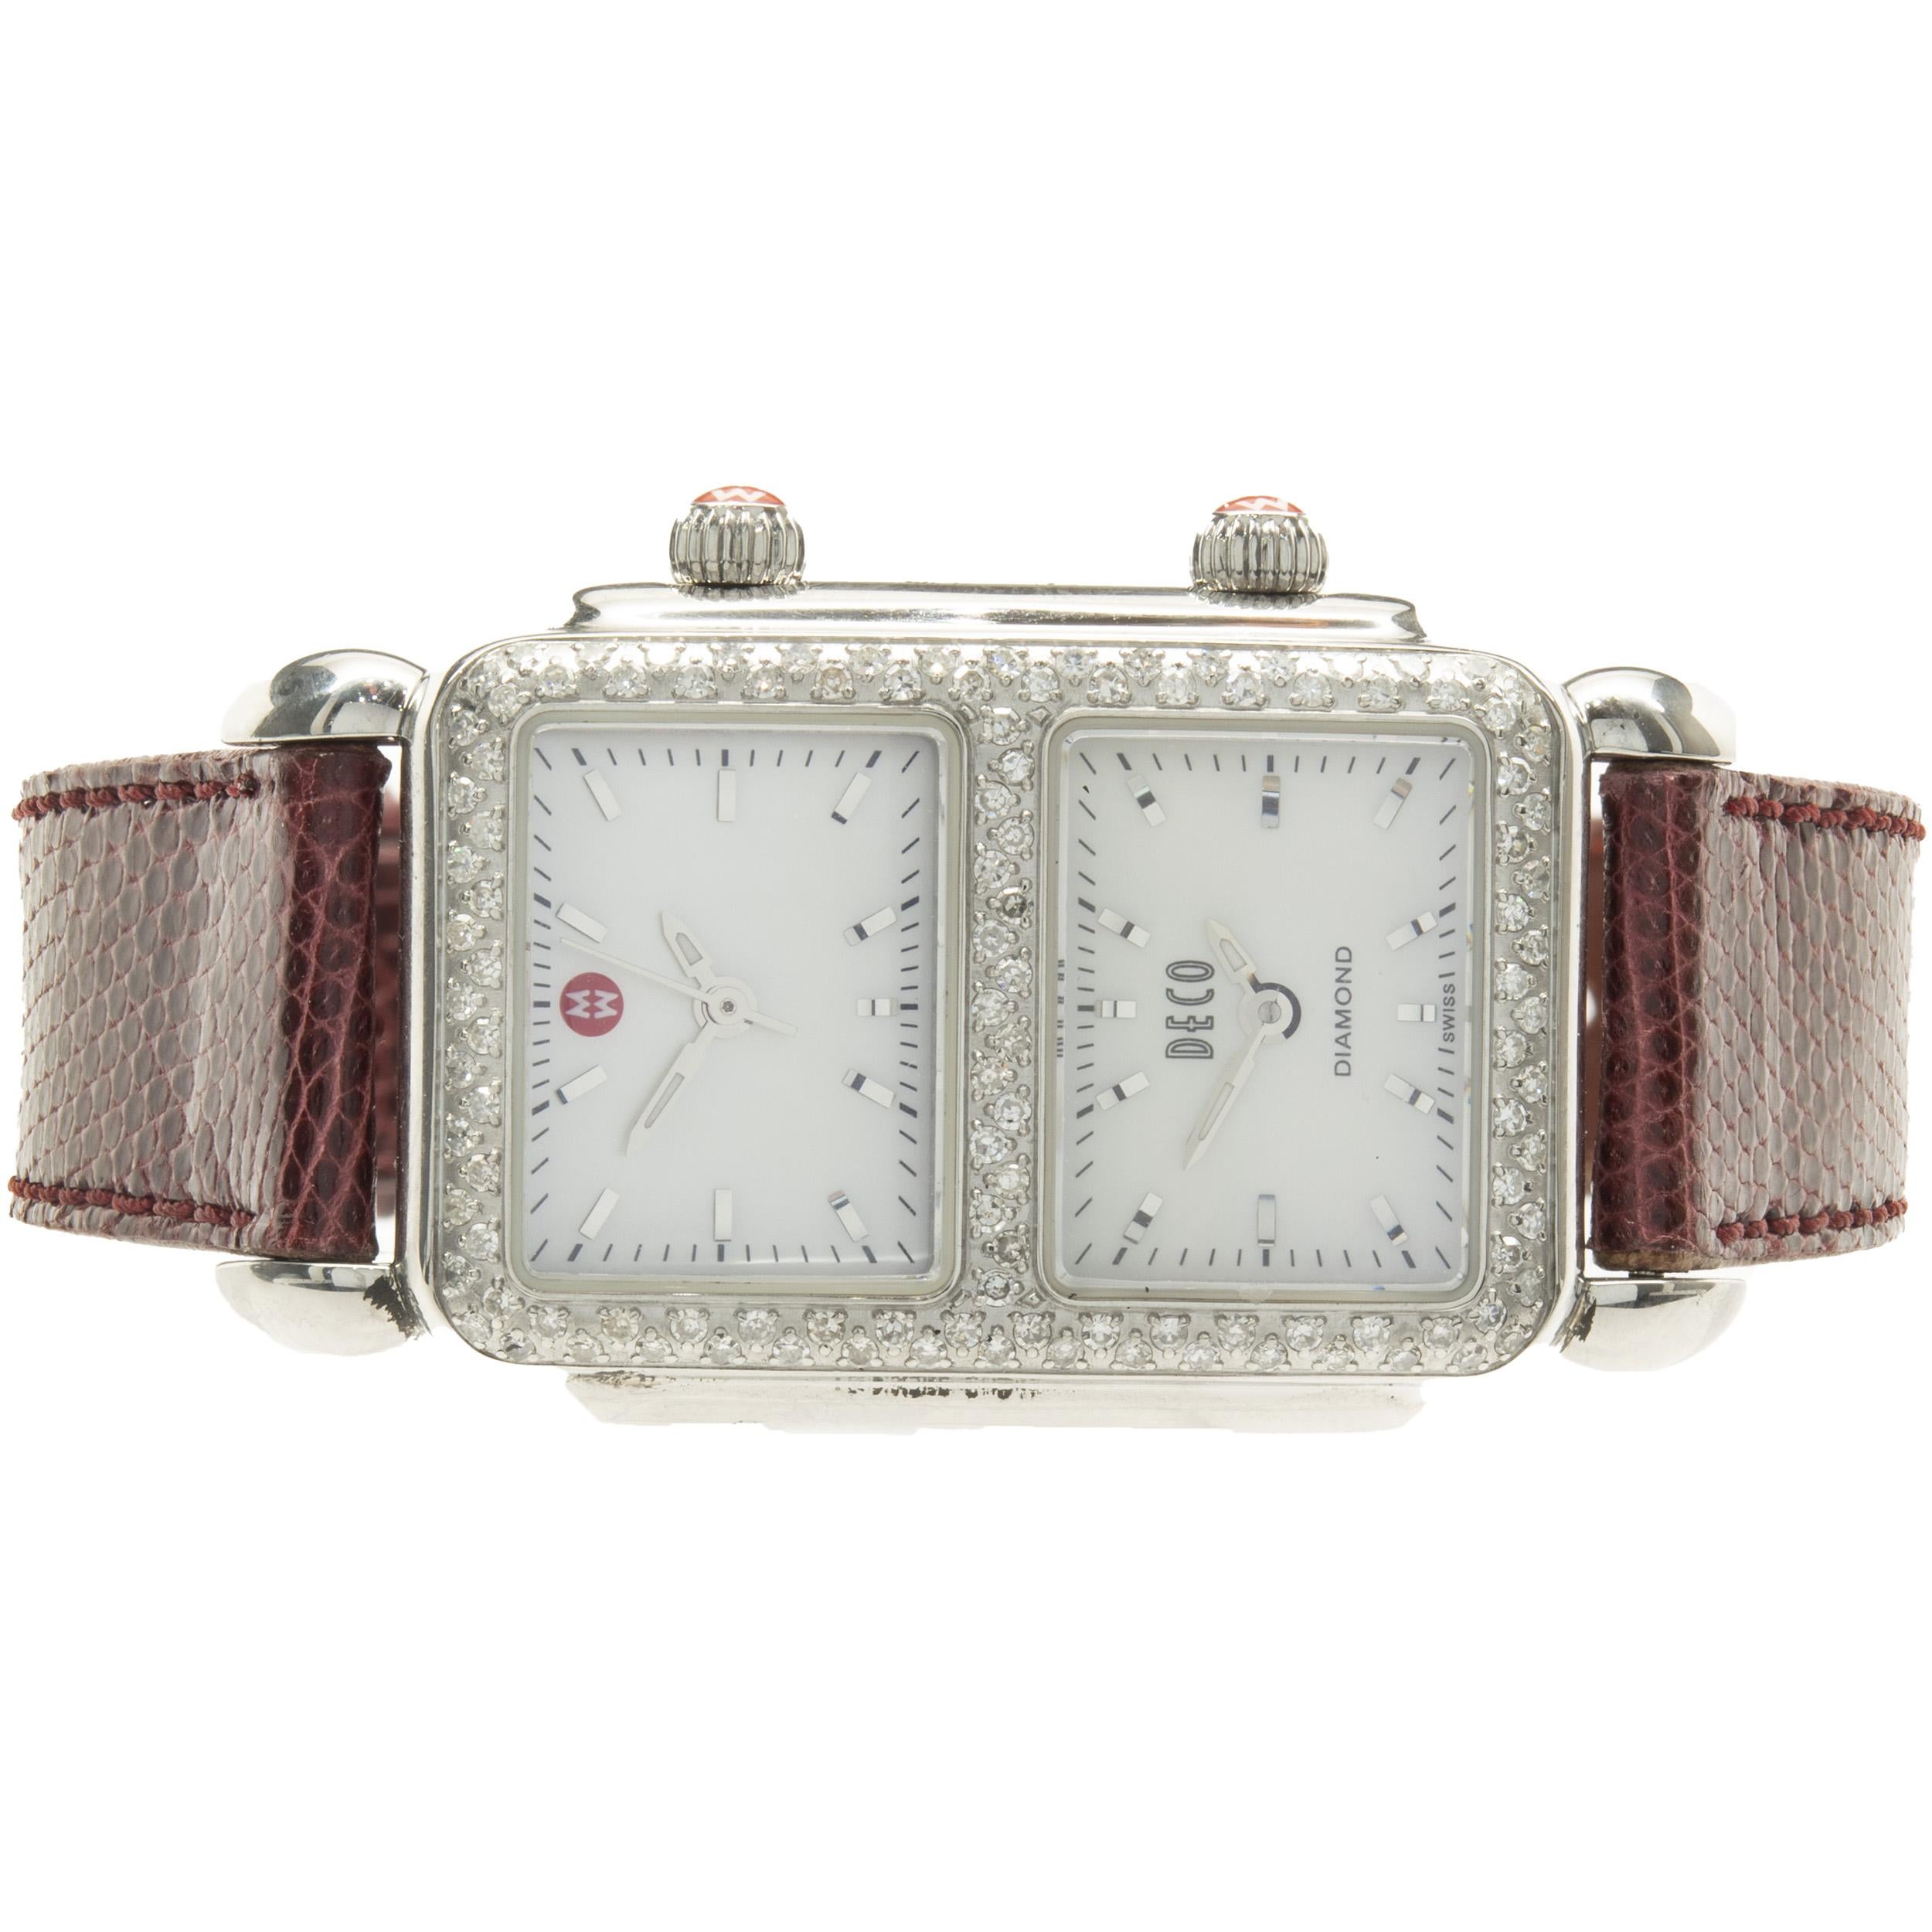 Movement: quartz
Function: hours, minutes, seconds, dual time
Case: 27mm stainless rectangular case, diamond bezel, sapphire crystal
Dial: mother of pearl
Band: red lizard strap, buckle
Serial #: CW0072XXX
Reference #: MW06S01A1025

No box or papers